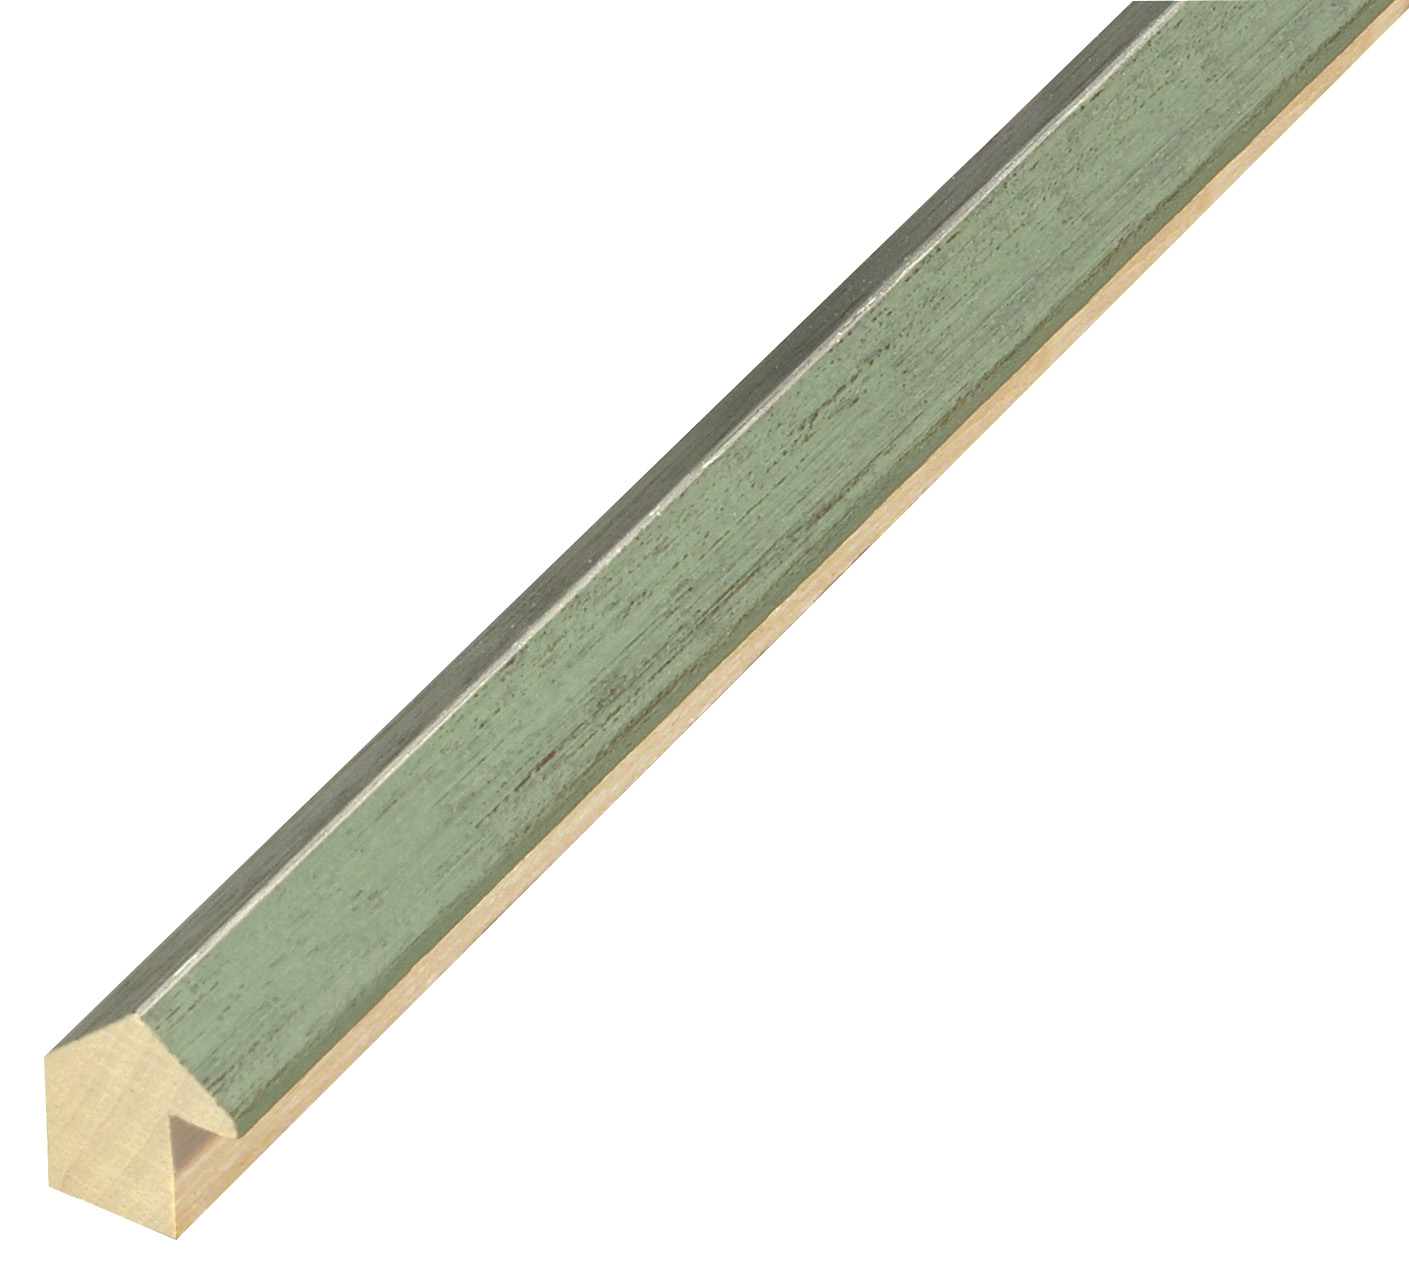 Moulding ayous - height 21mm - widht 18mm - Green